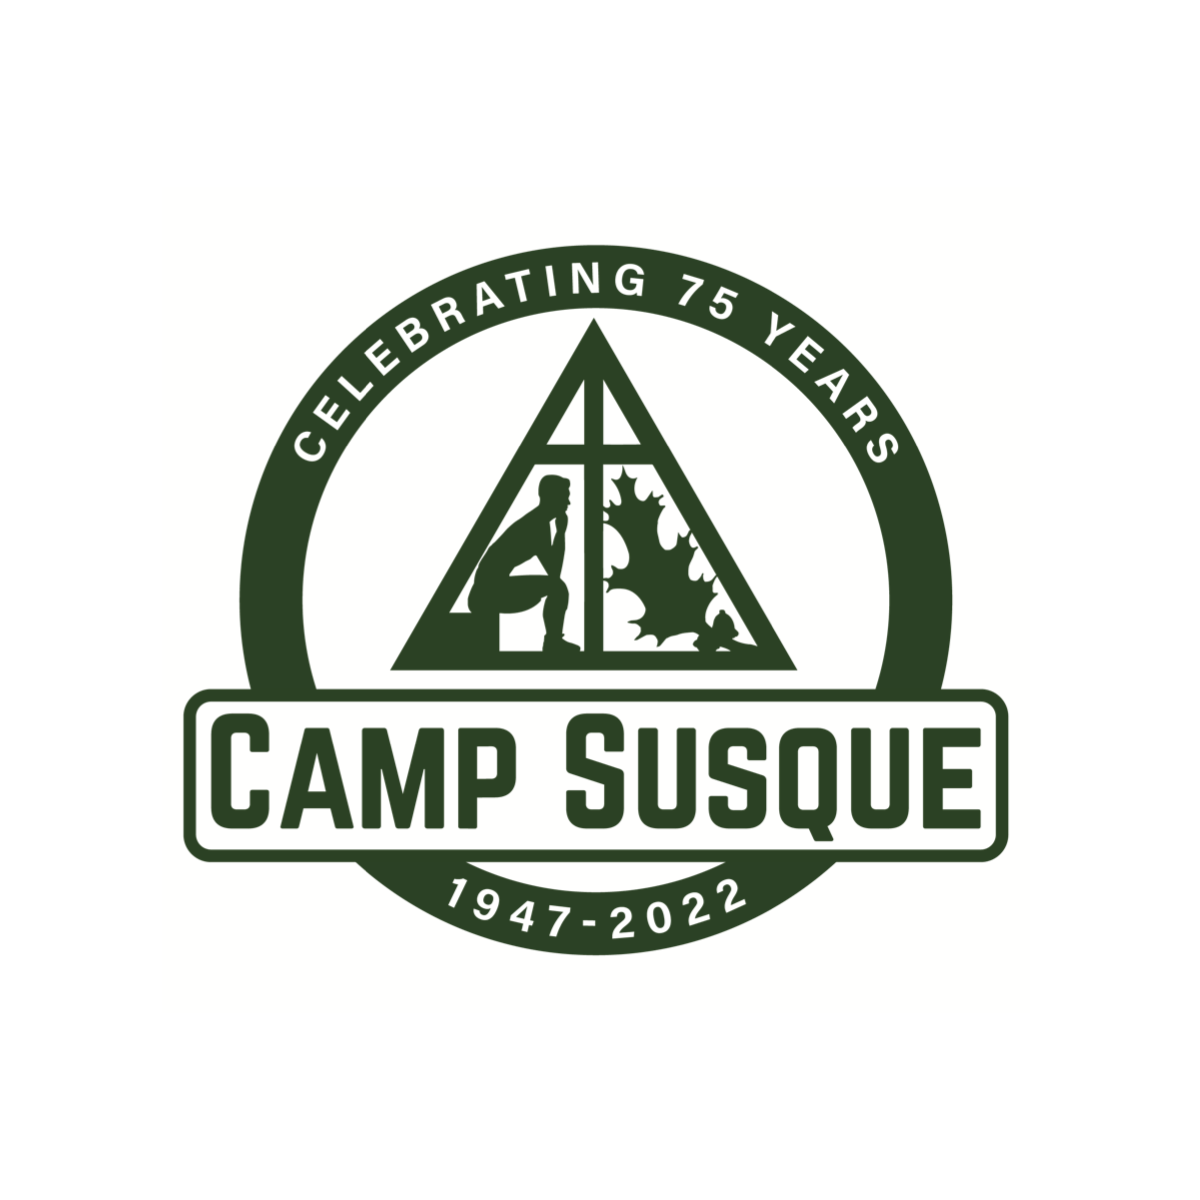 Camp Susque – Central PA Chamber of Commerce